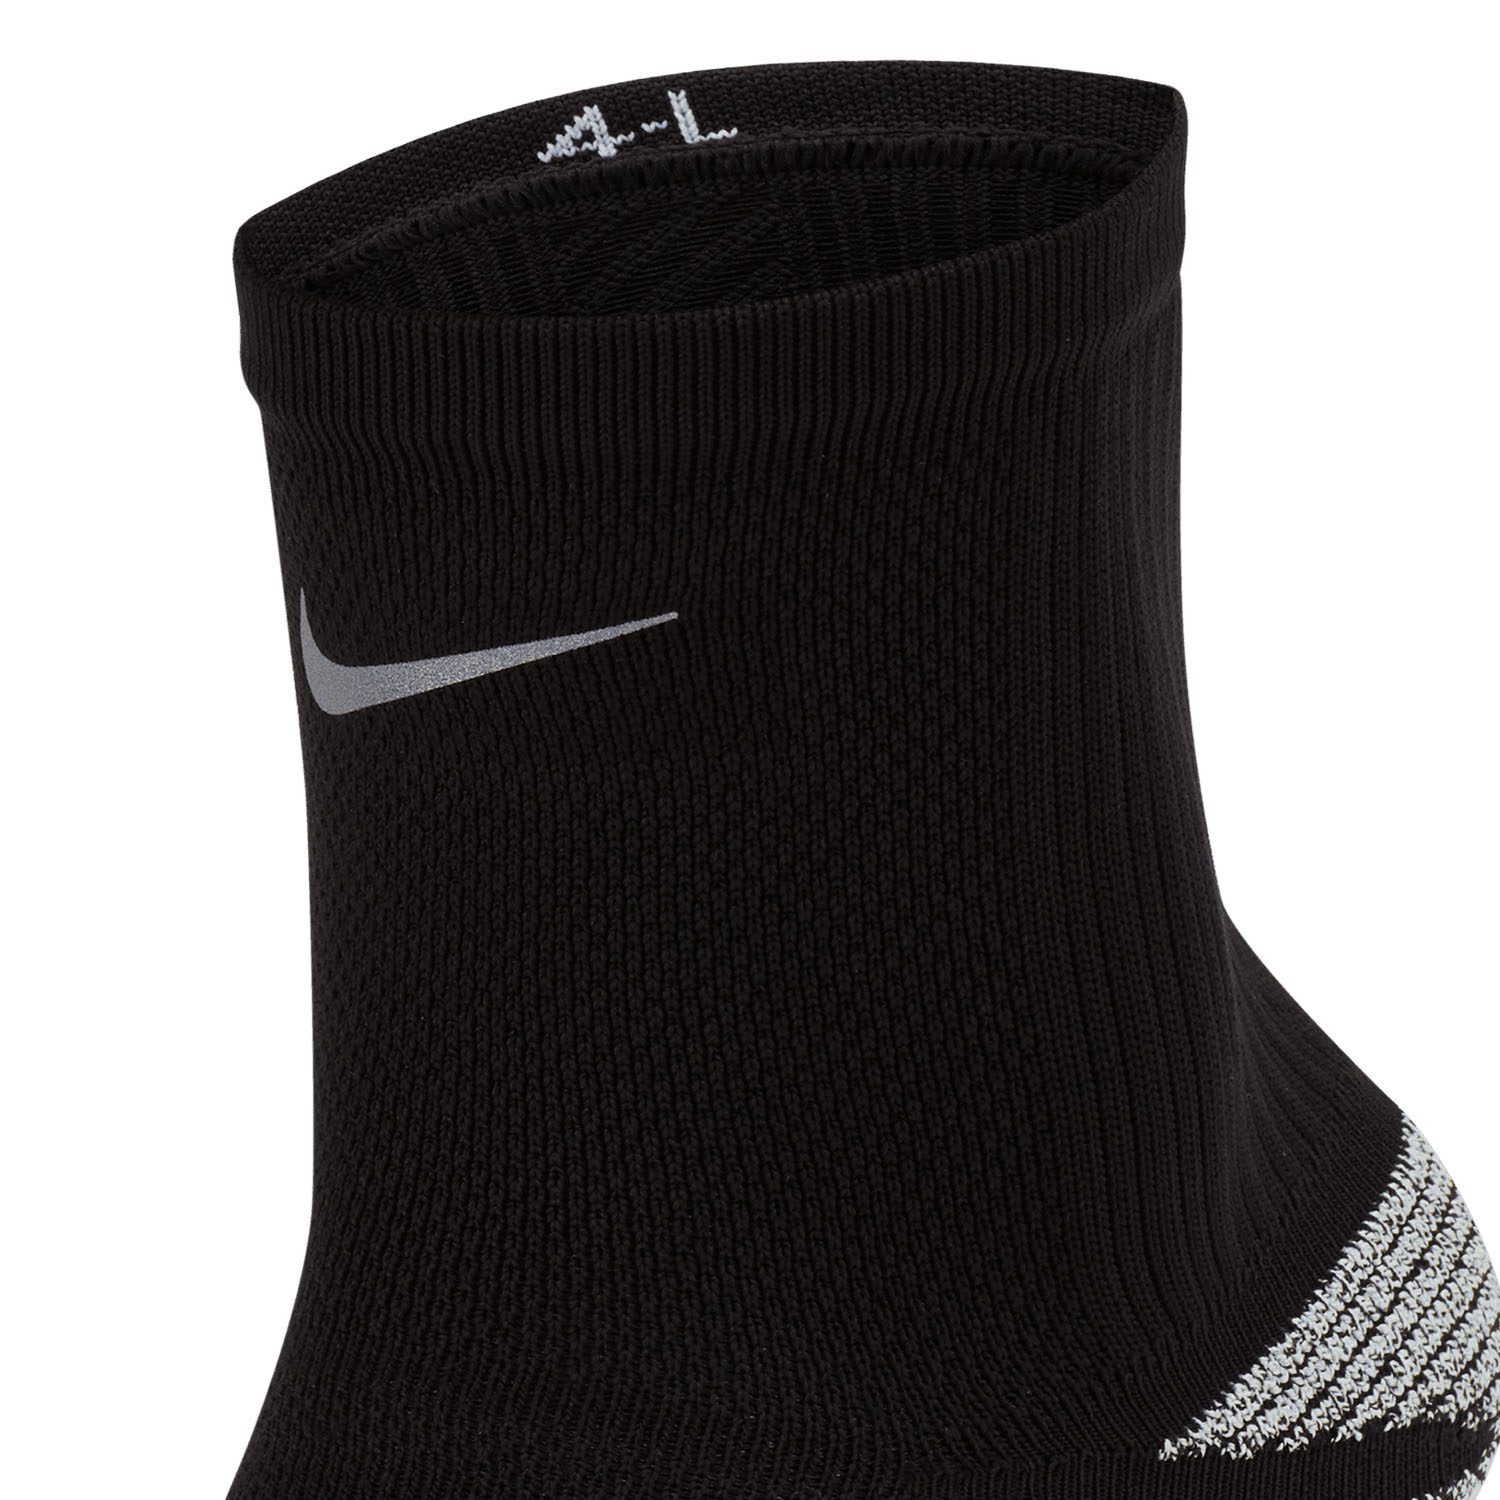 Nike Racing Calcetines - Black/Reflective Silver